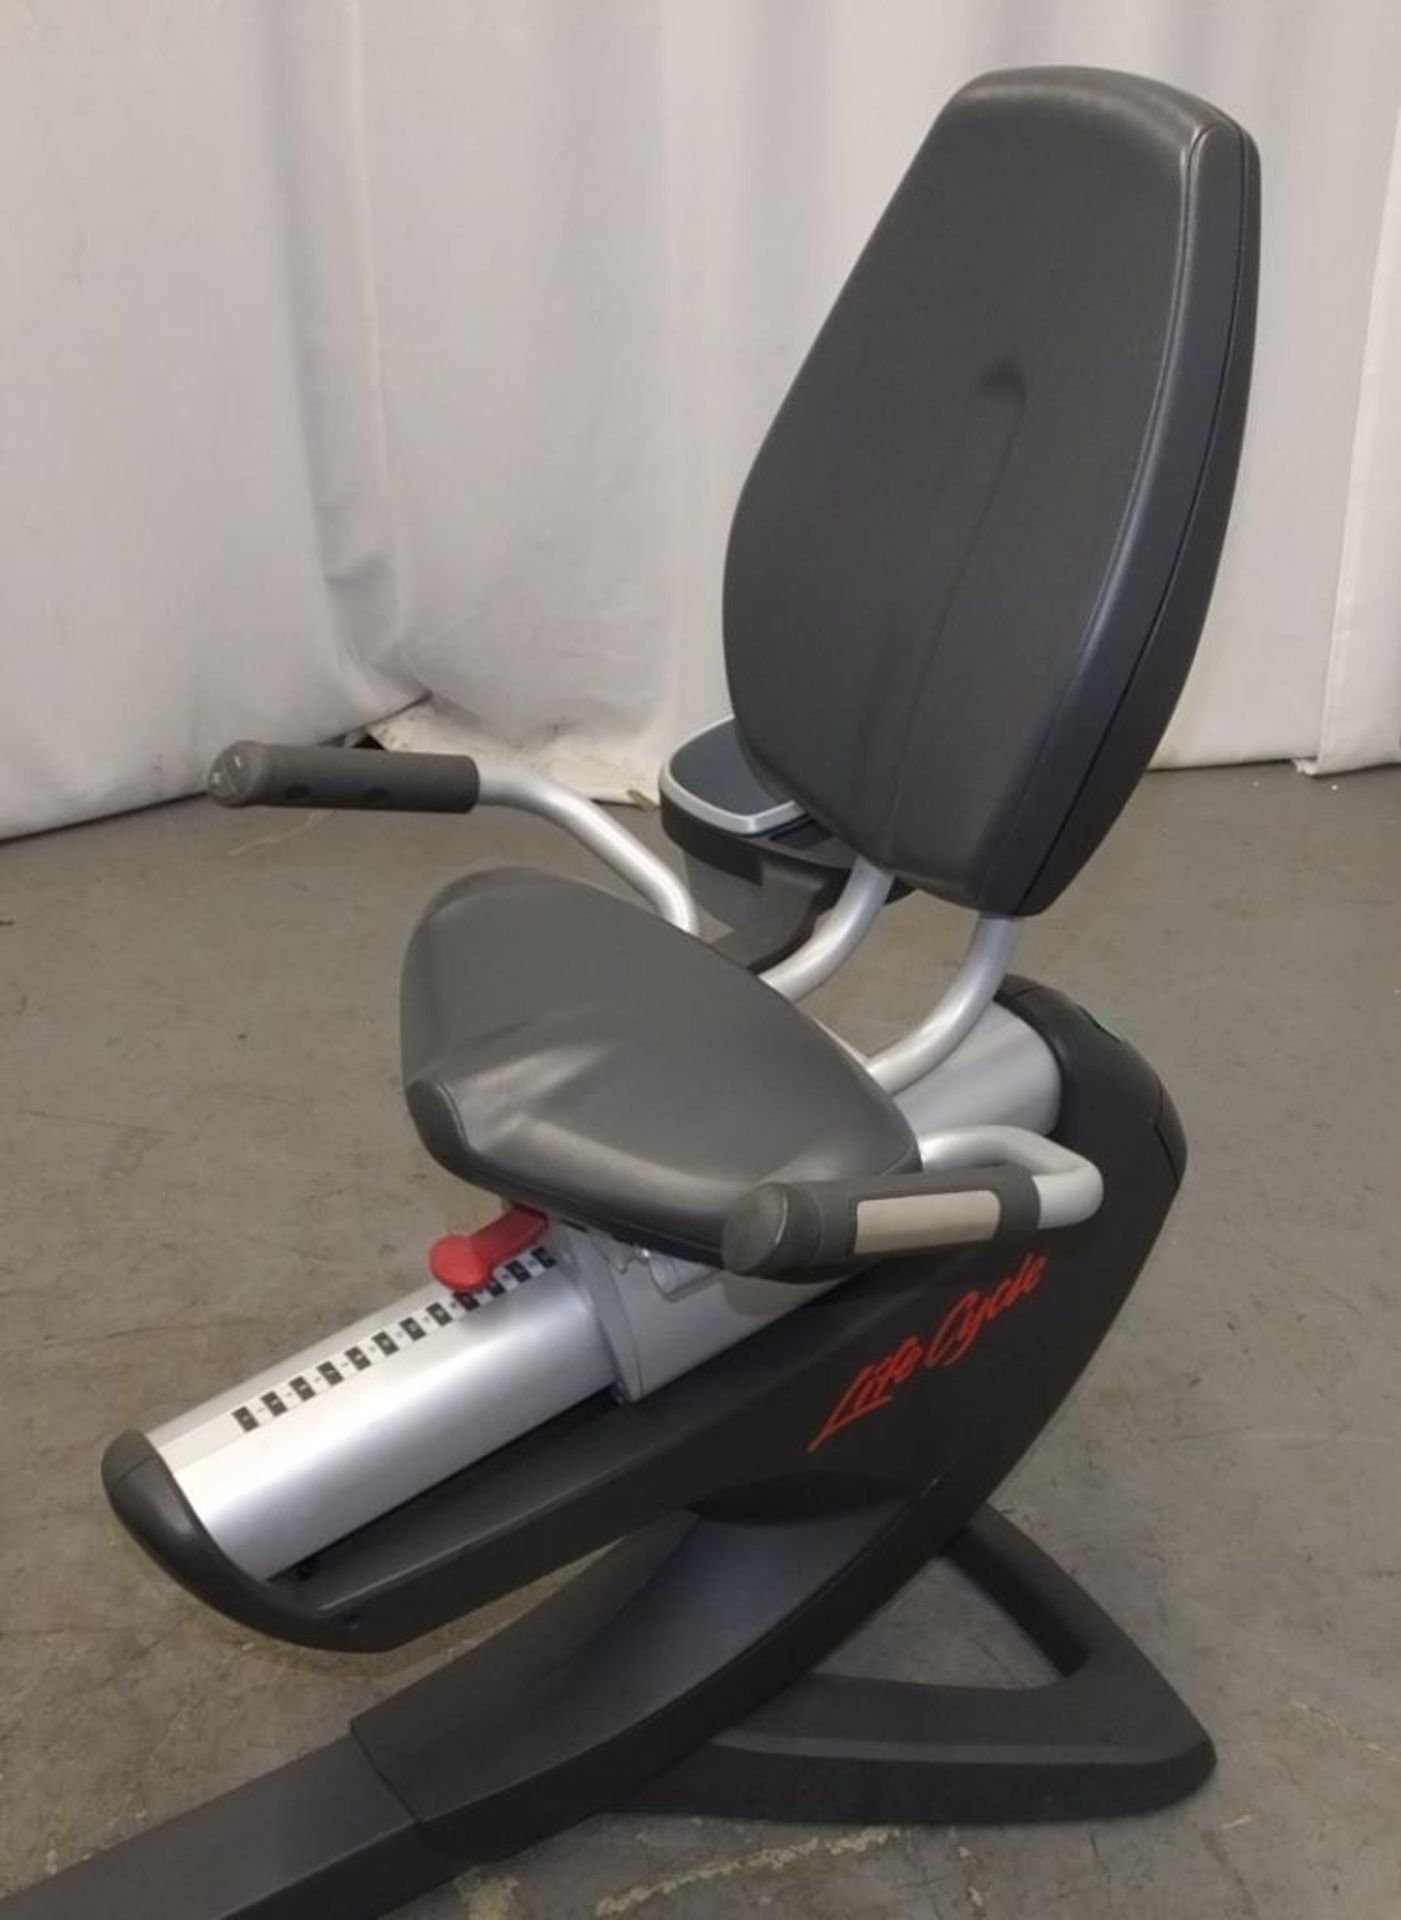 Life Fitness 95R Recumbent Life Cycle Exercise Bike - powers up - functionality untested - Image 3 of 6